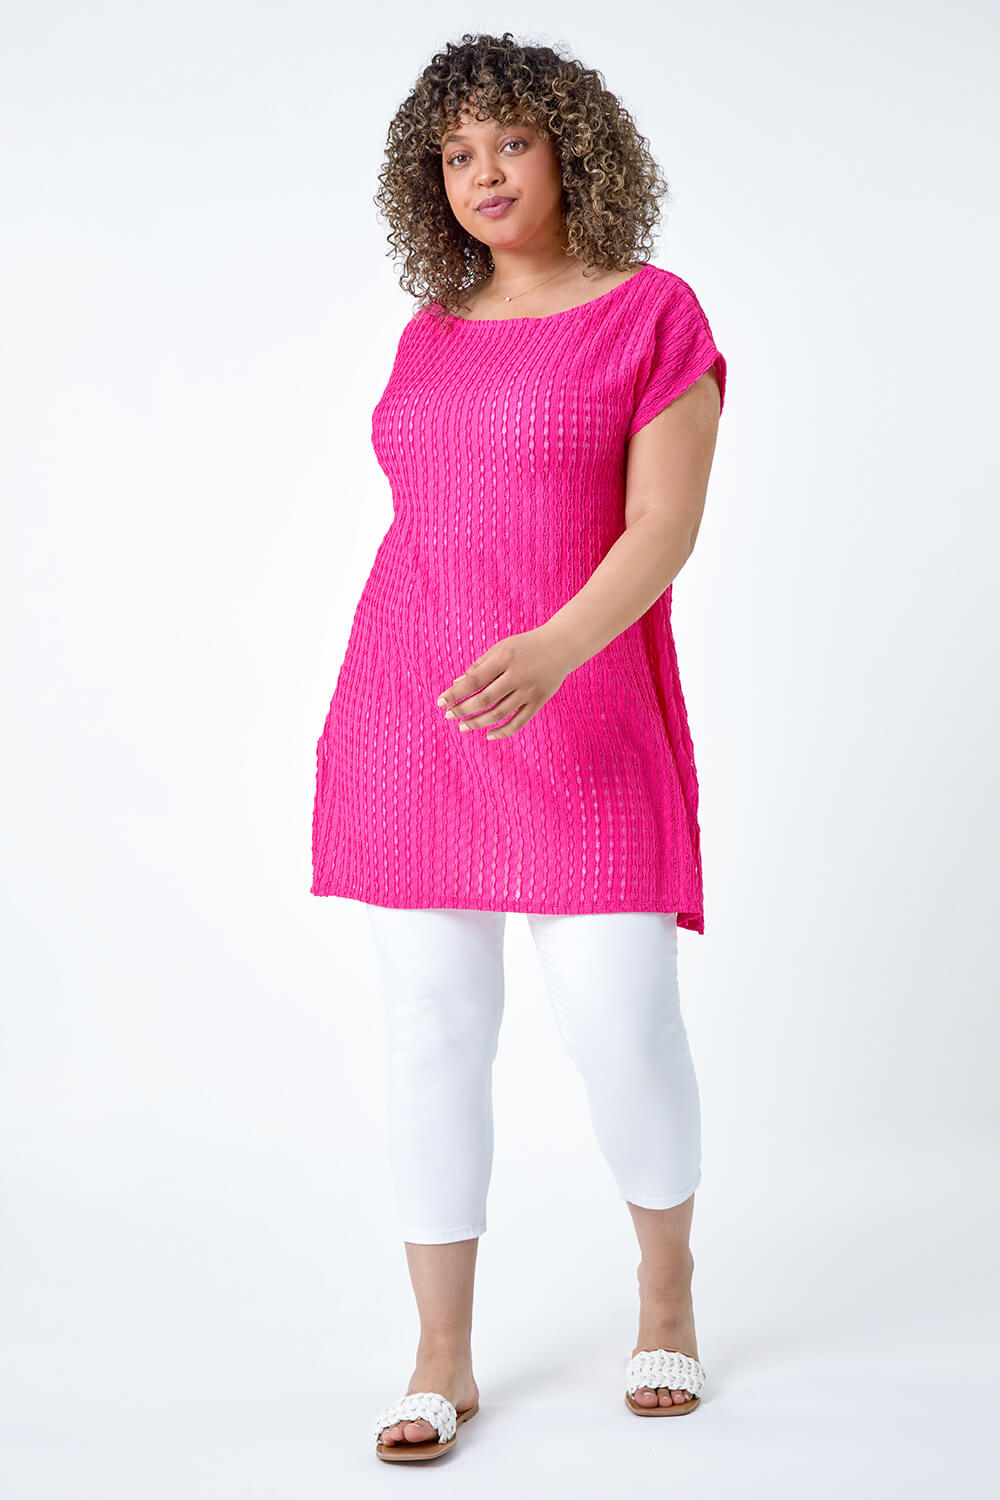 PINK Curve Textured Short Sleeve T-Shirt, Image 2 of 5